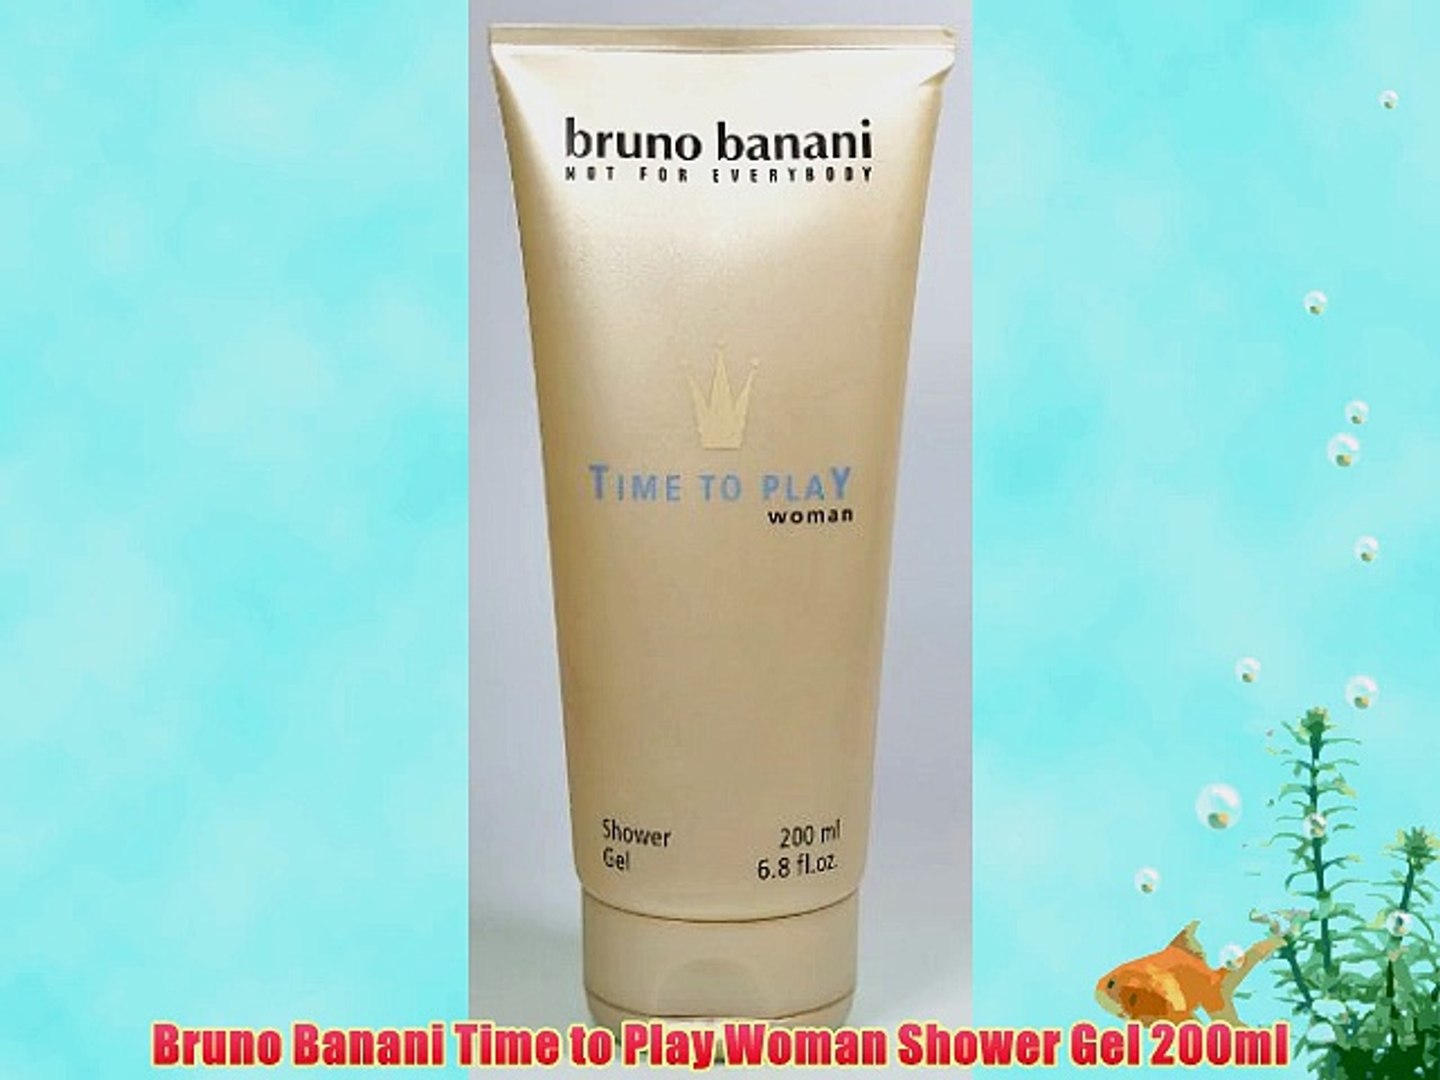 Bruno Banani Time to Play Woman Shower Gel 200ml - video Dailymotion